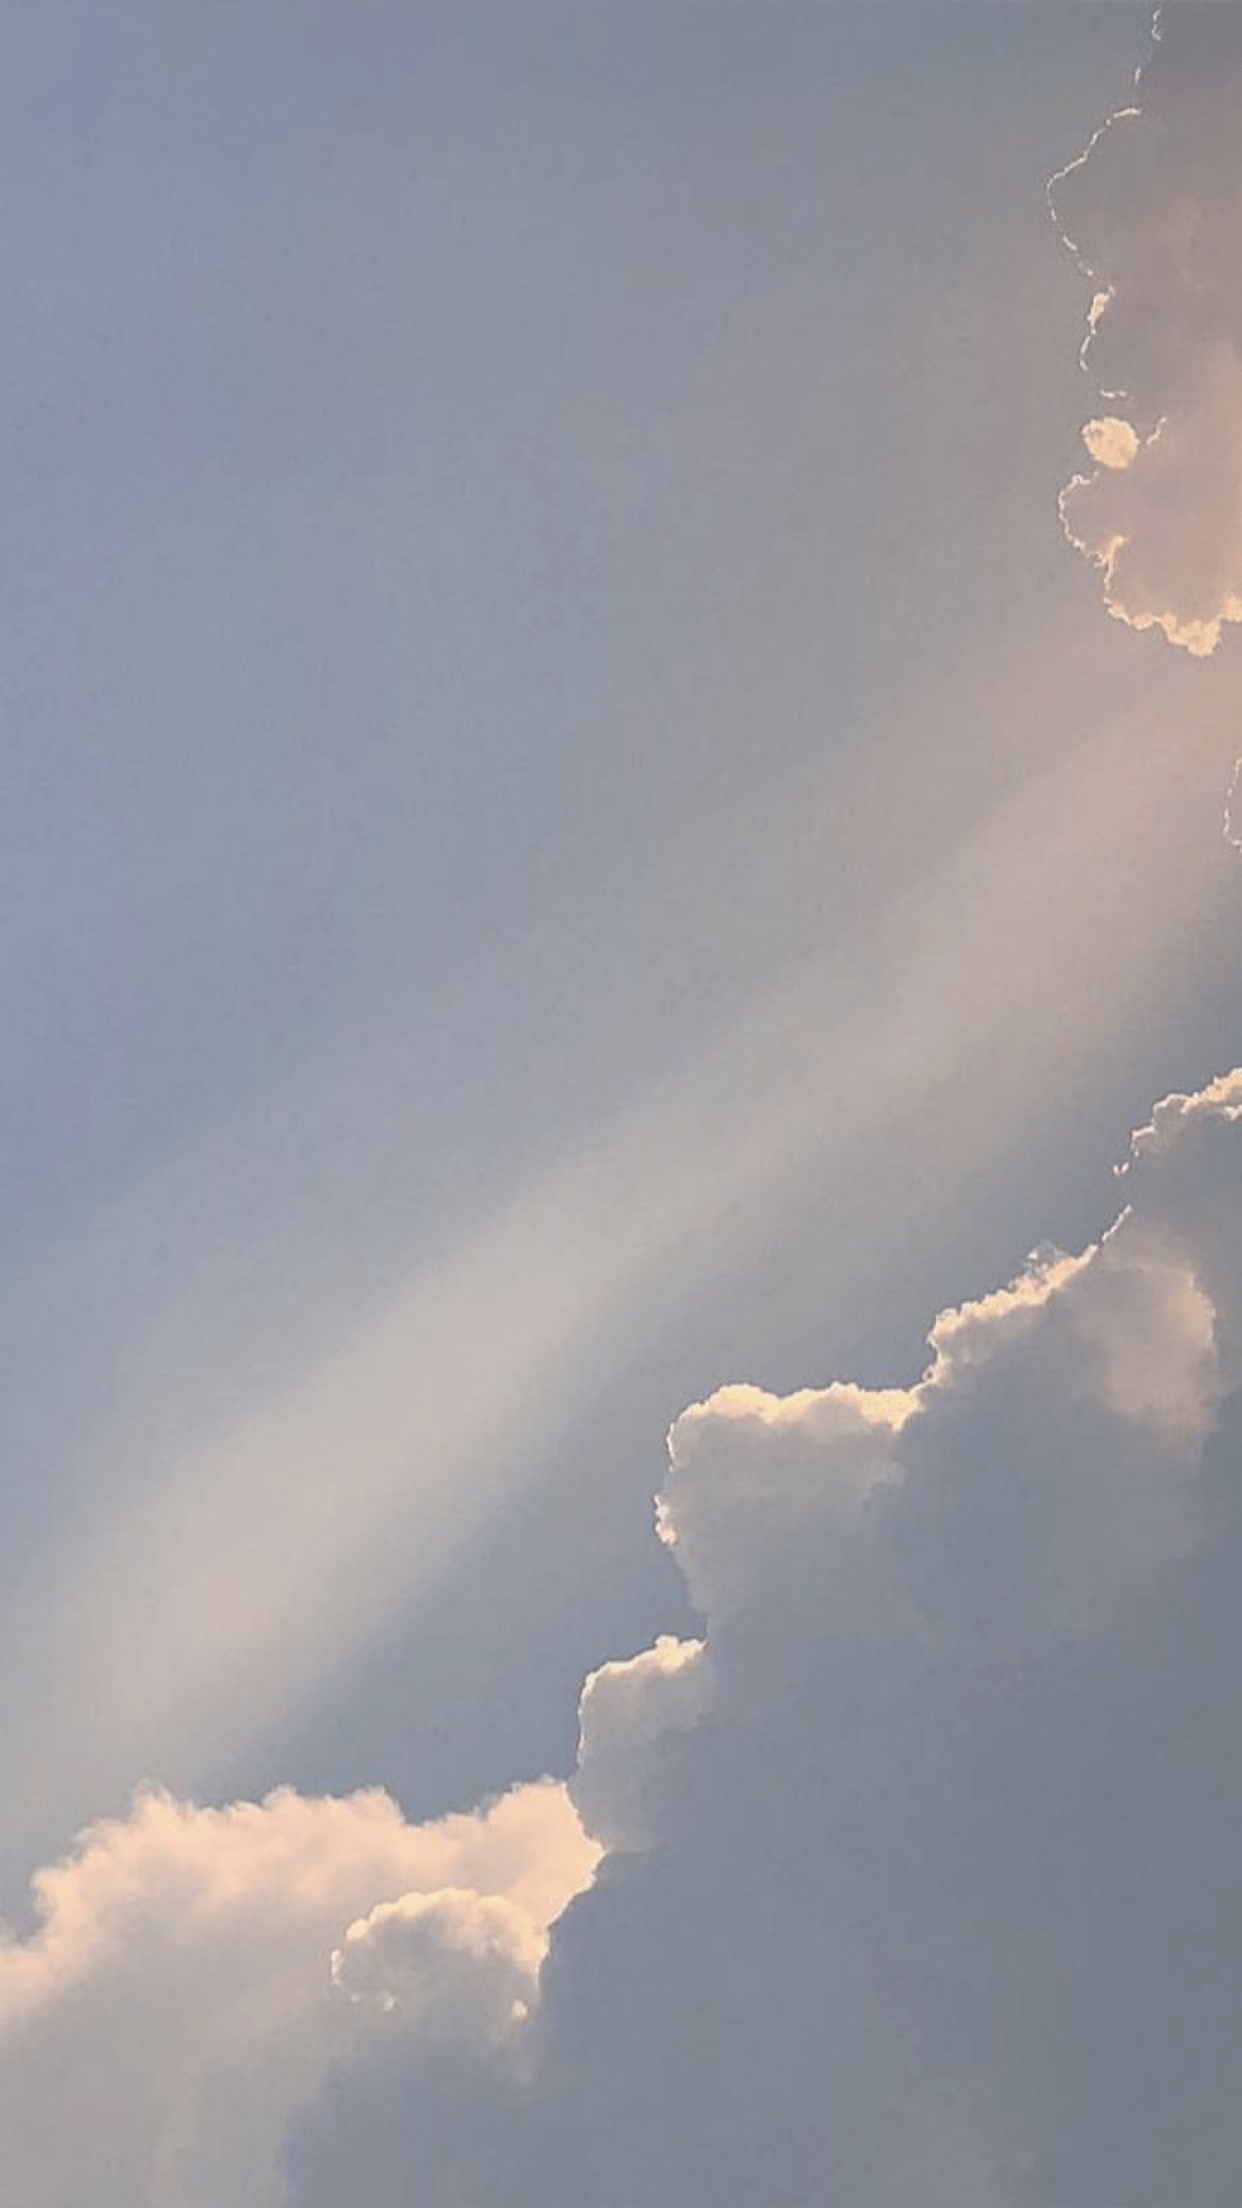 A plane flying through the clouds with sun shining - Gray, sunlight